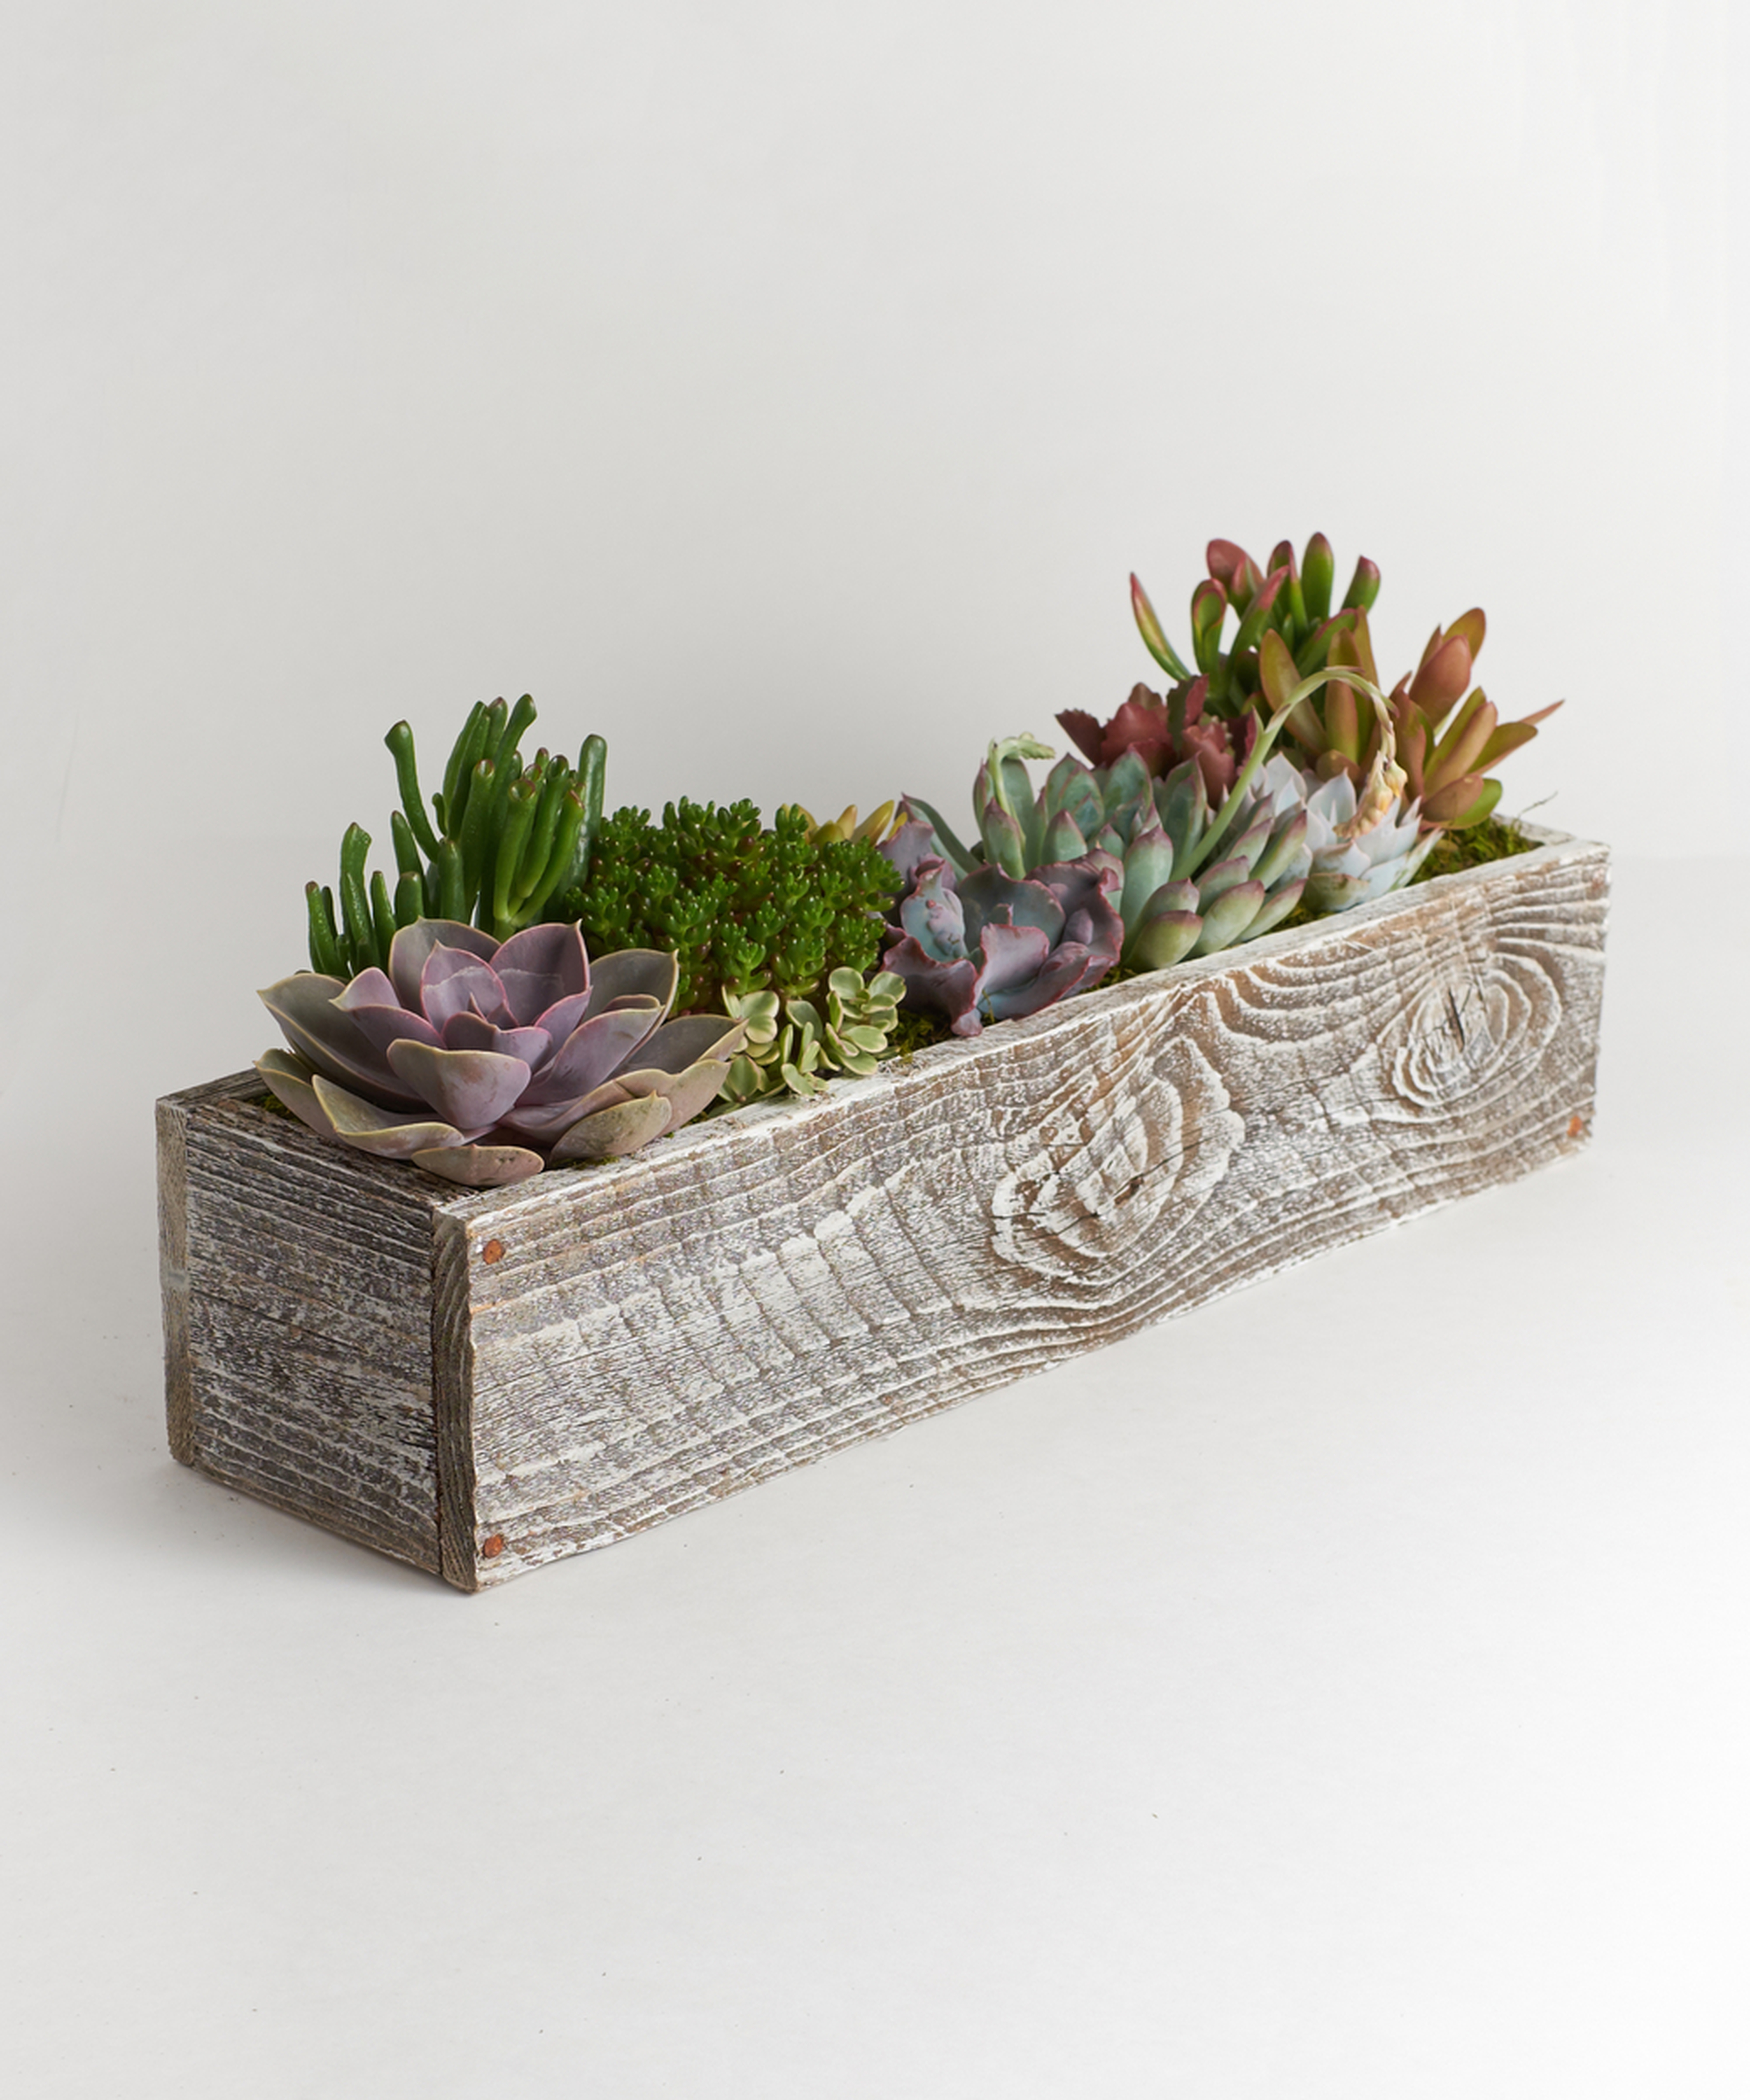 KIMBERLEE WOOD RECTANGLE PLANTER WITH SUCCULENTS, WHITE, SMALL - Lulu and Georgia